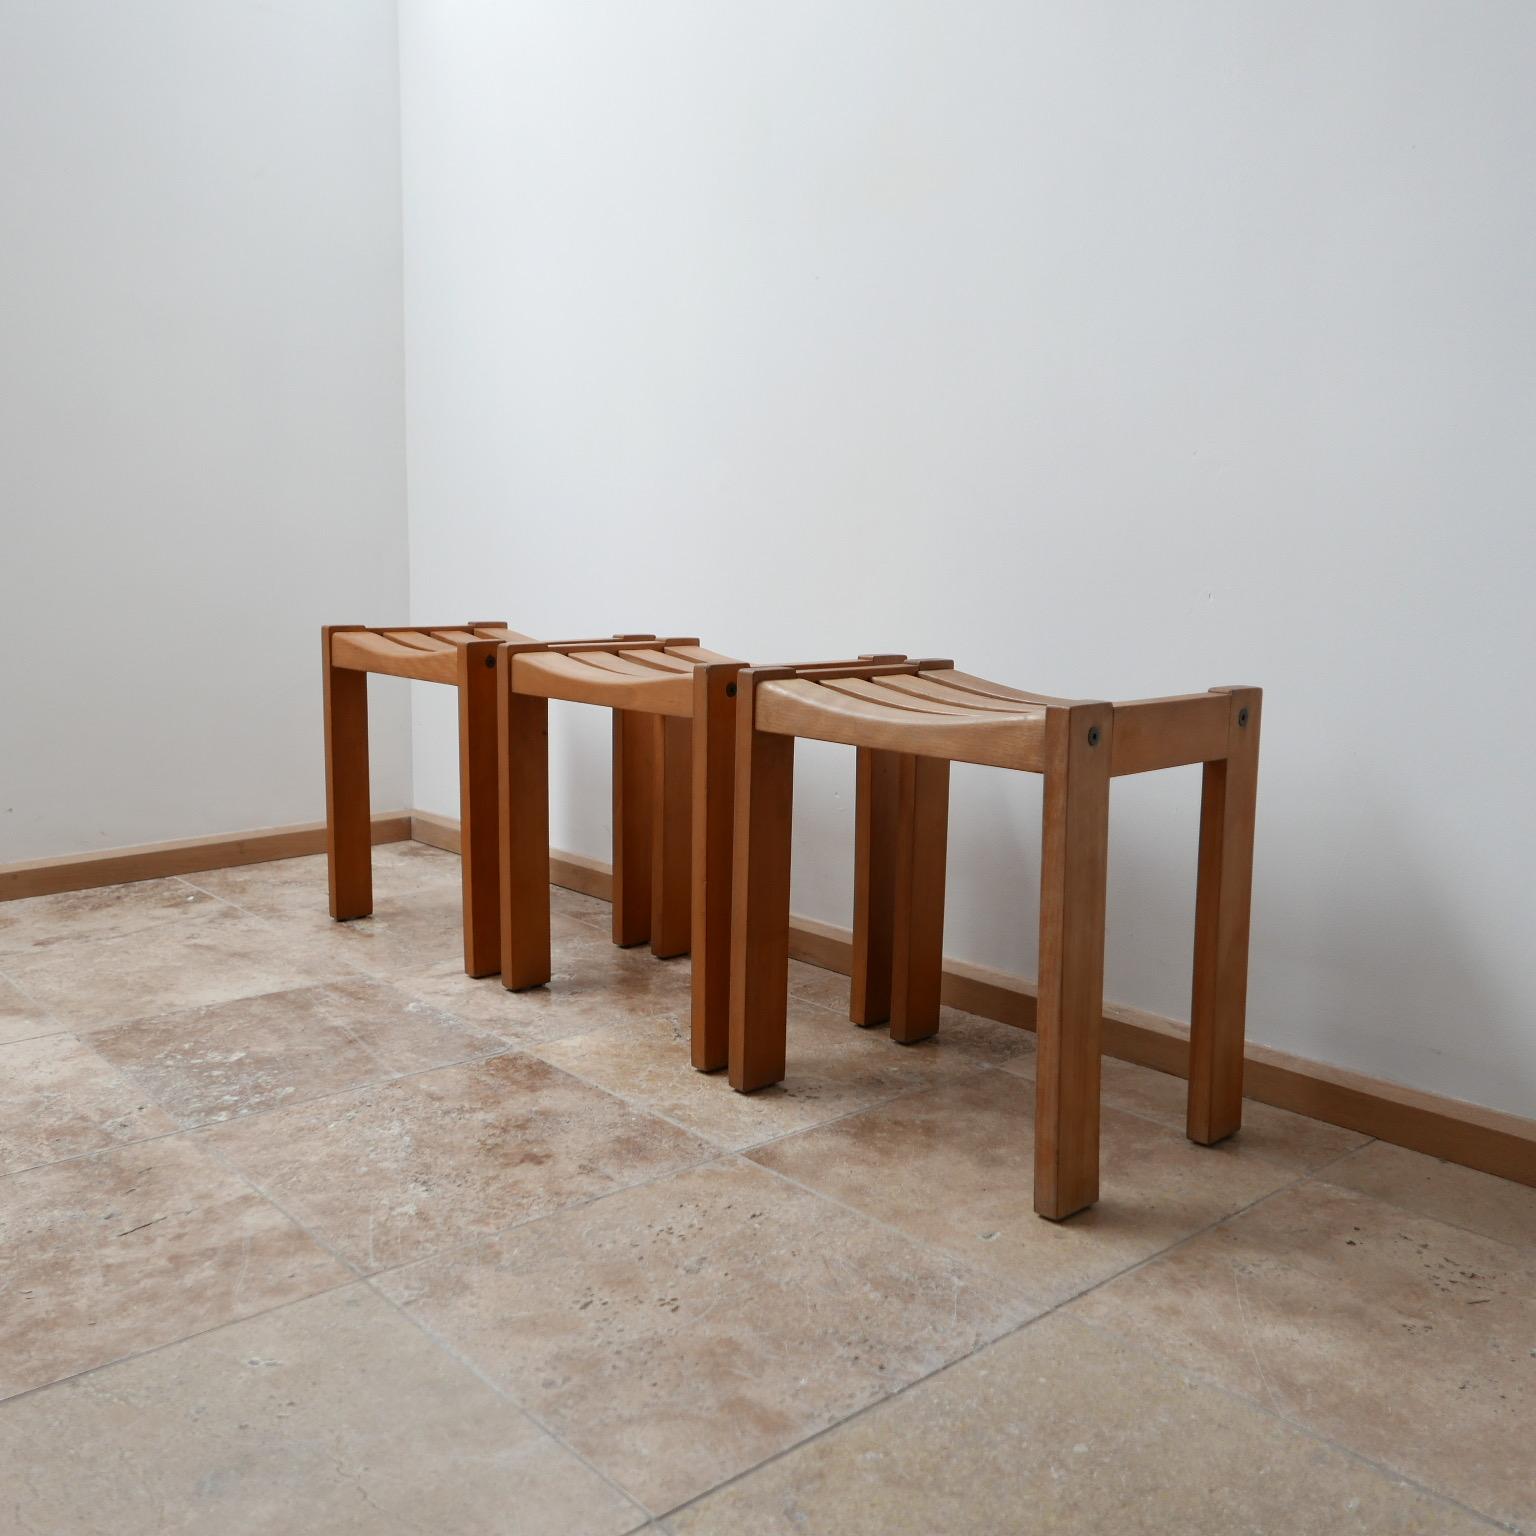 Midcentury French Blonde Oak Stools in the Manner of Guillerme et Chambron '11' For Sale 5